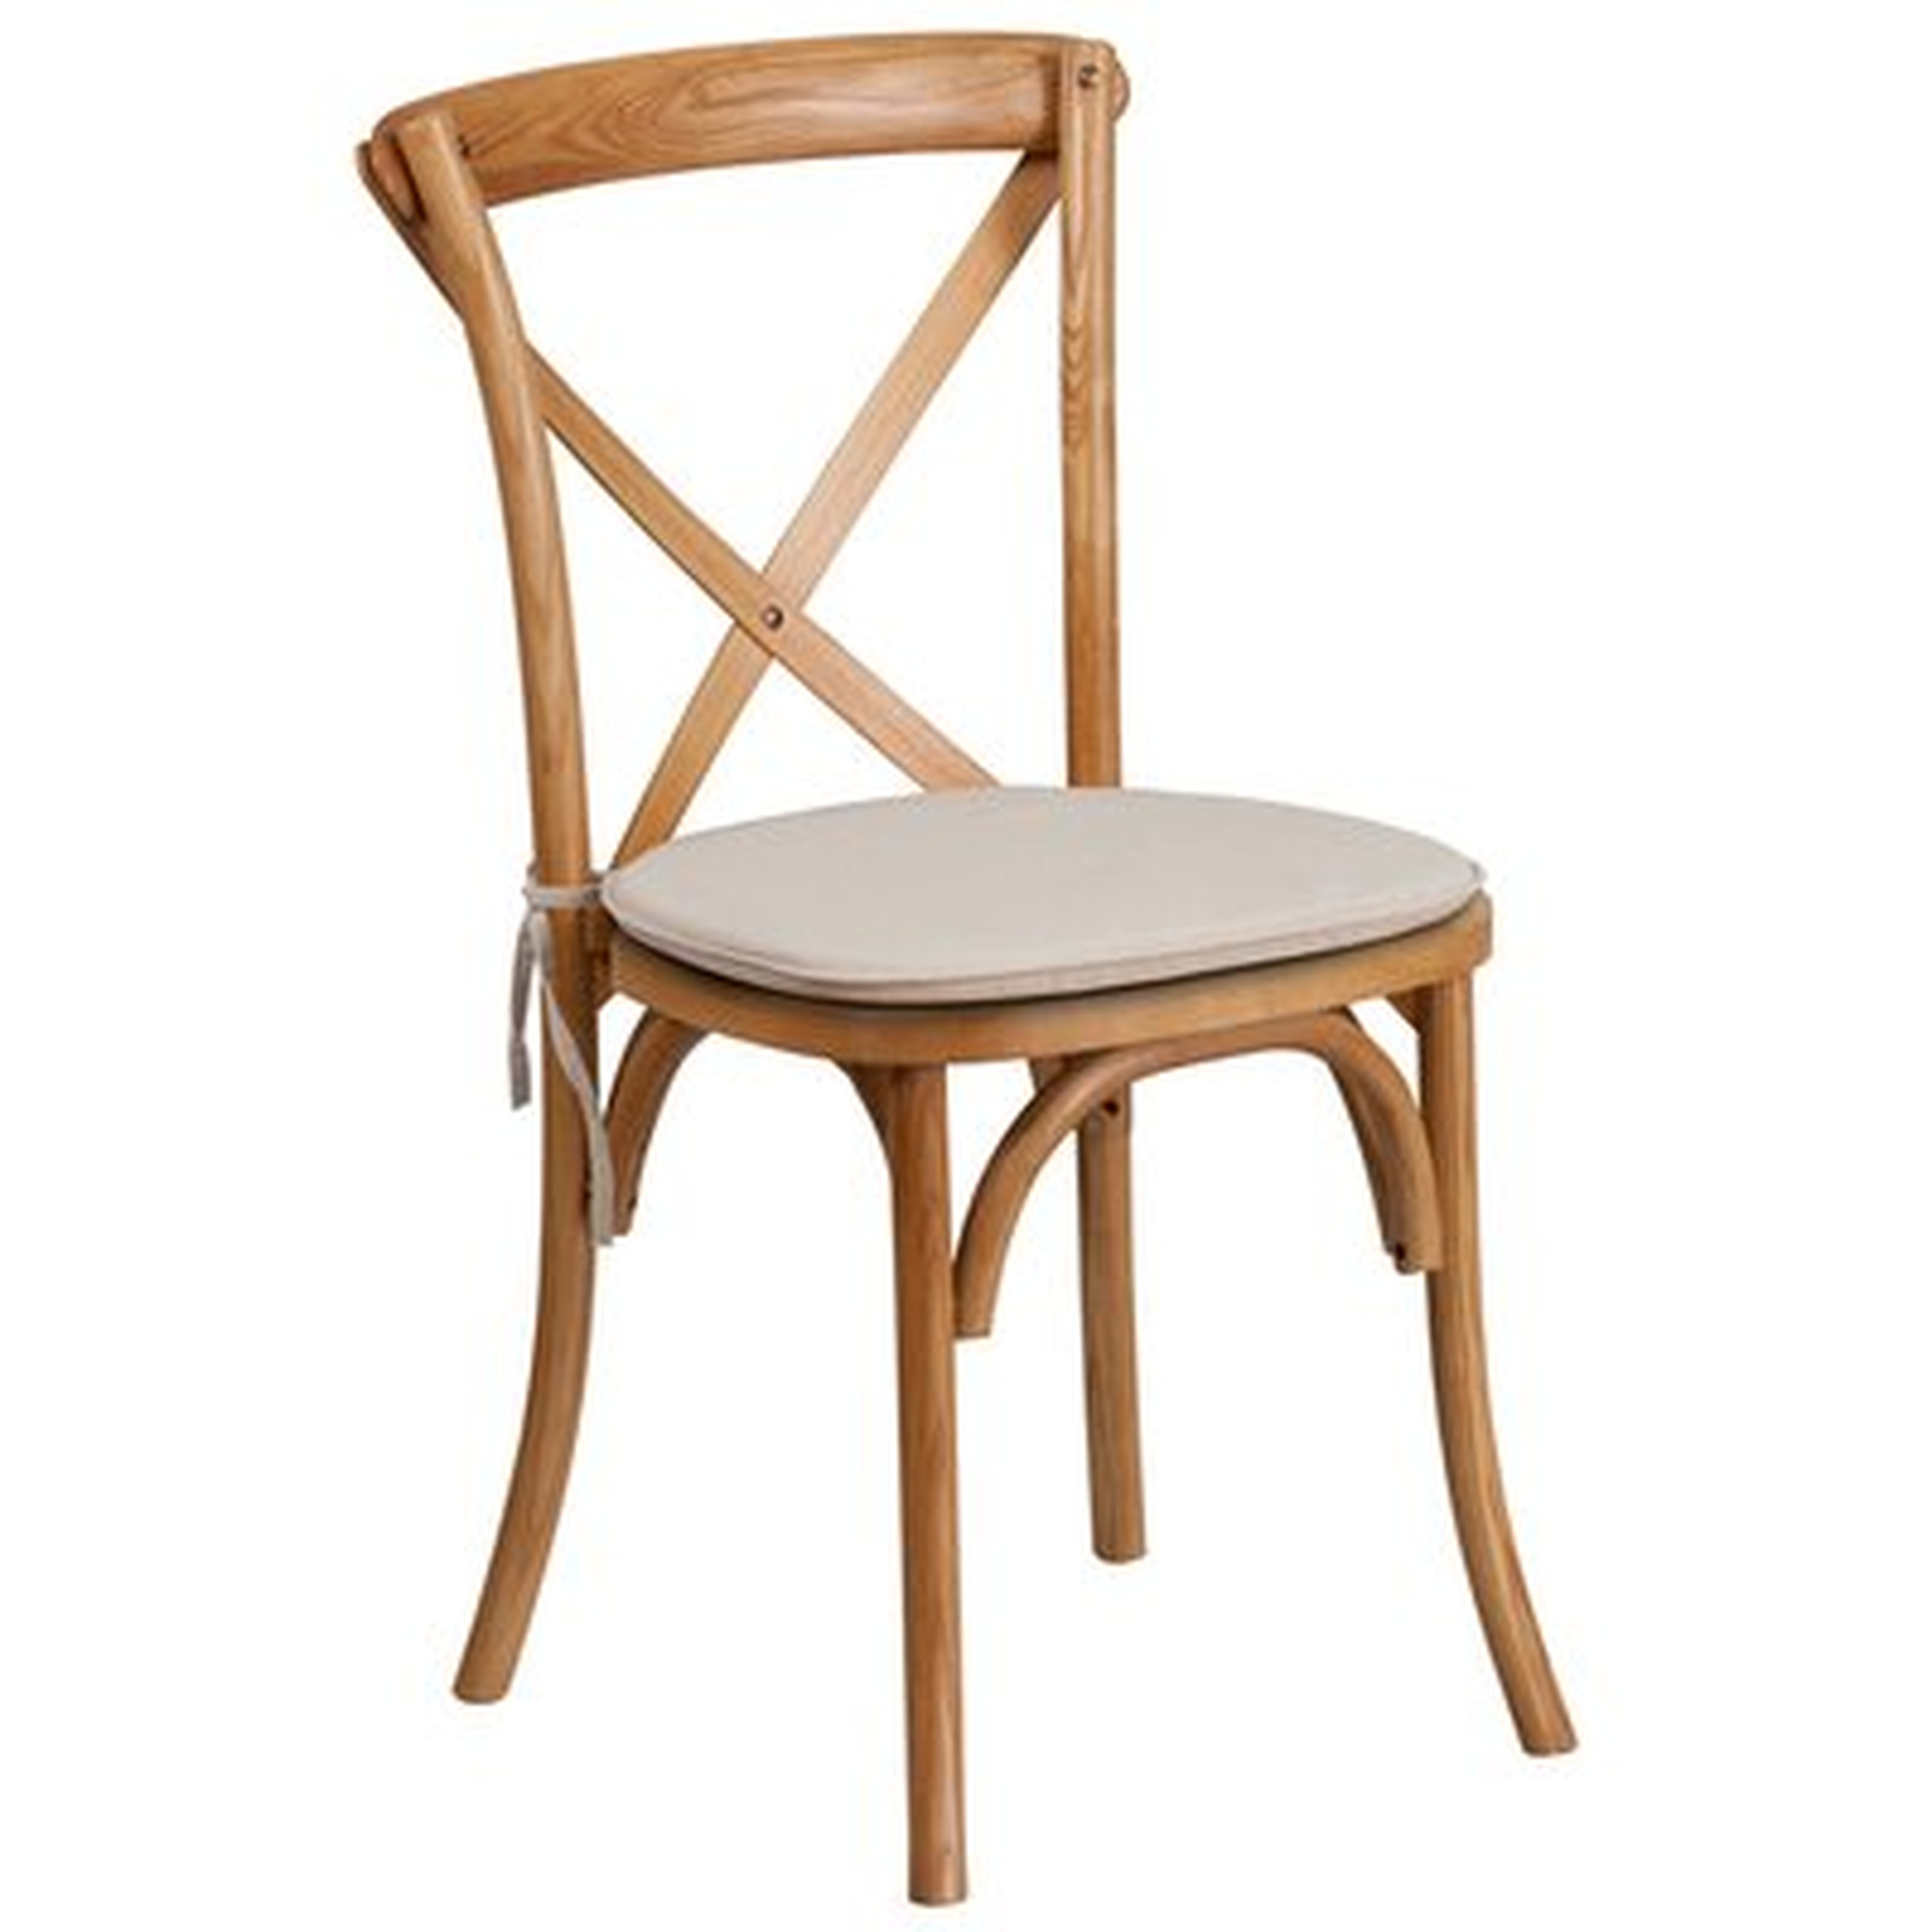 Magpie Early American Cross Back Solid Wood Dining Chair with Cushion - Wayfair